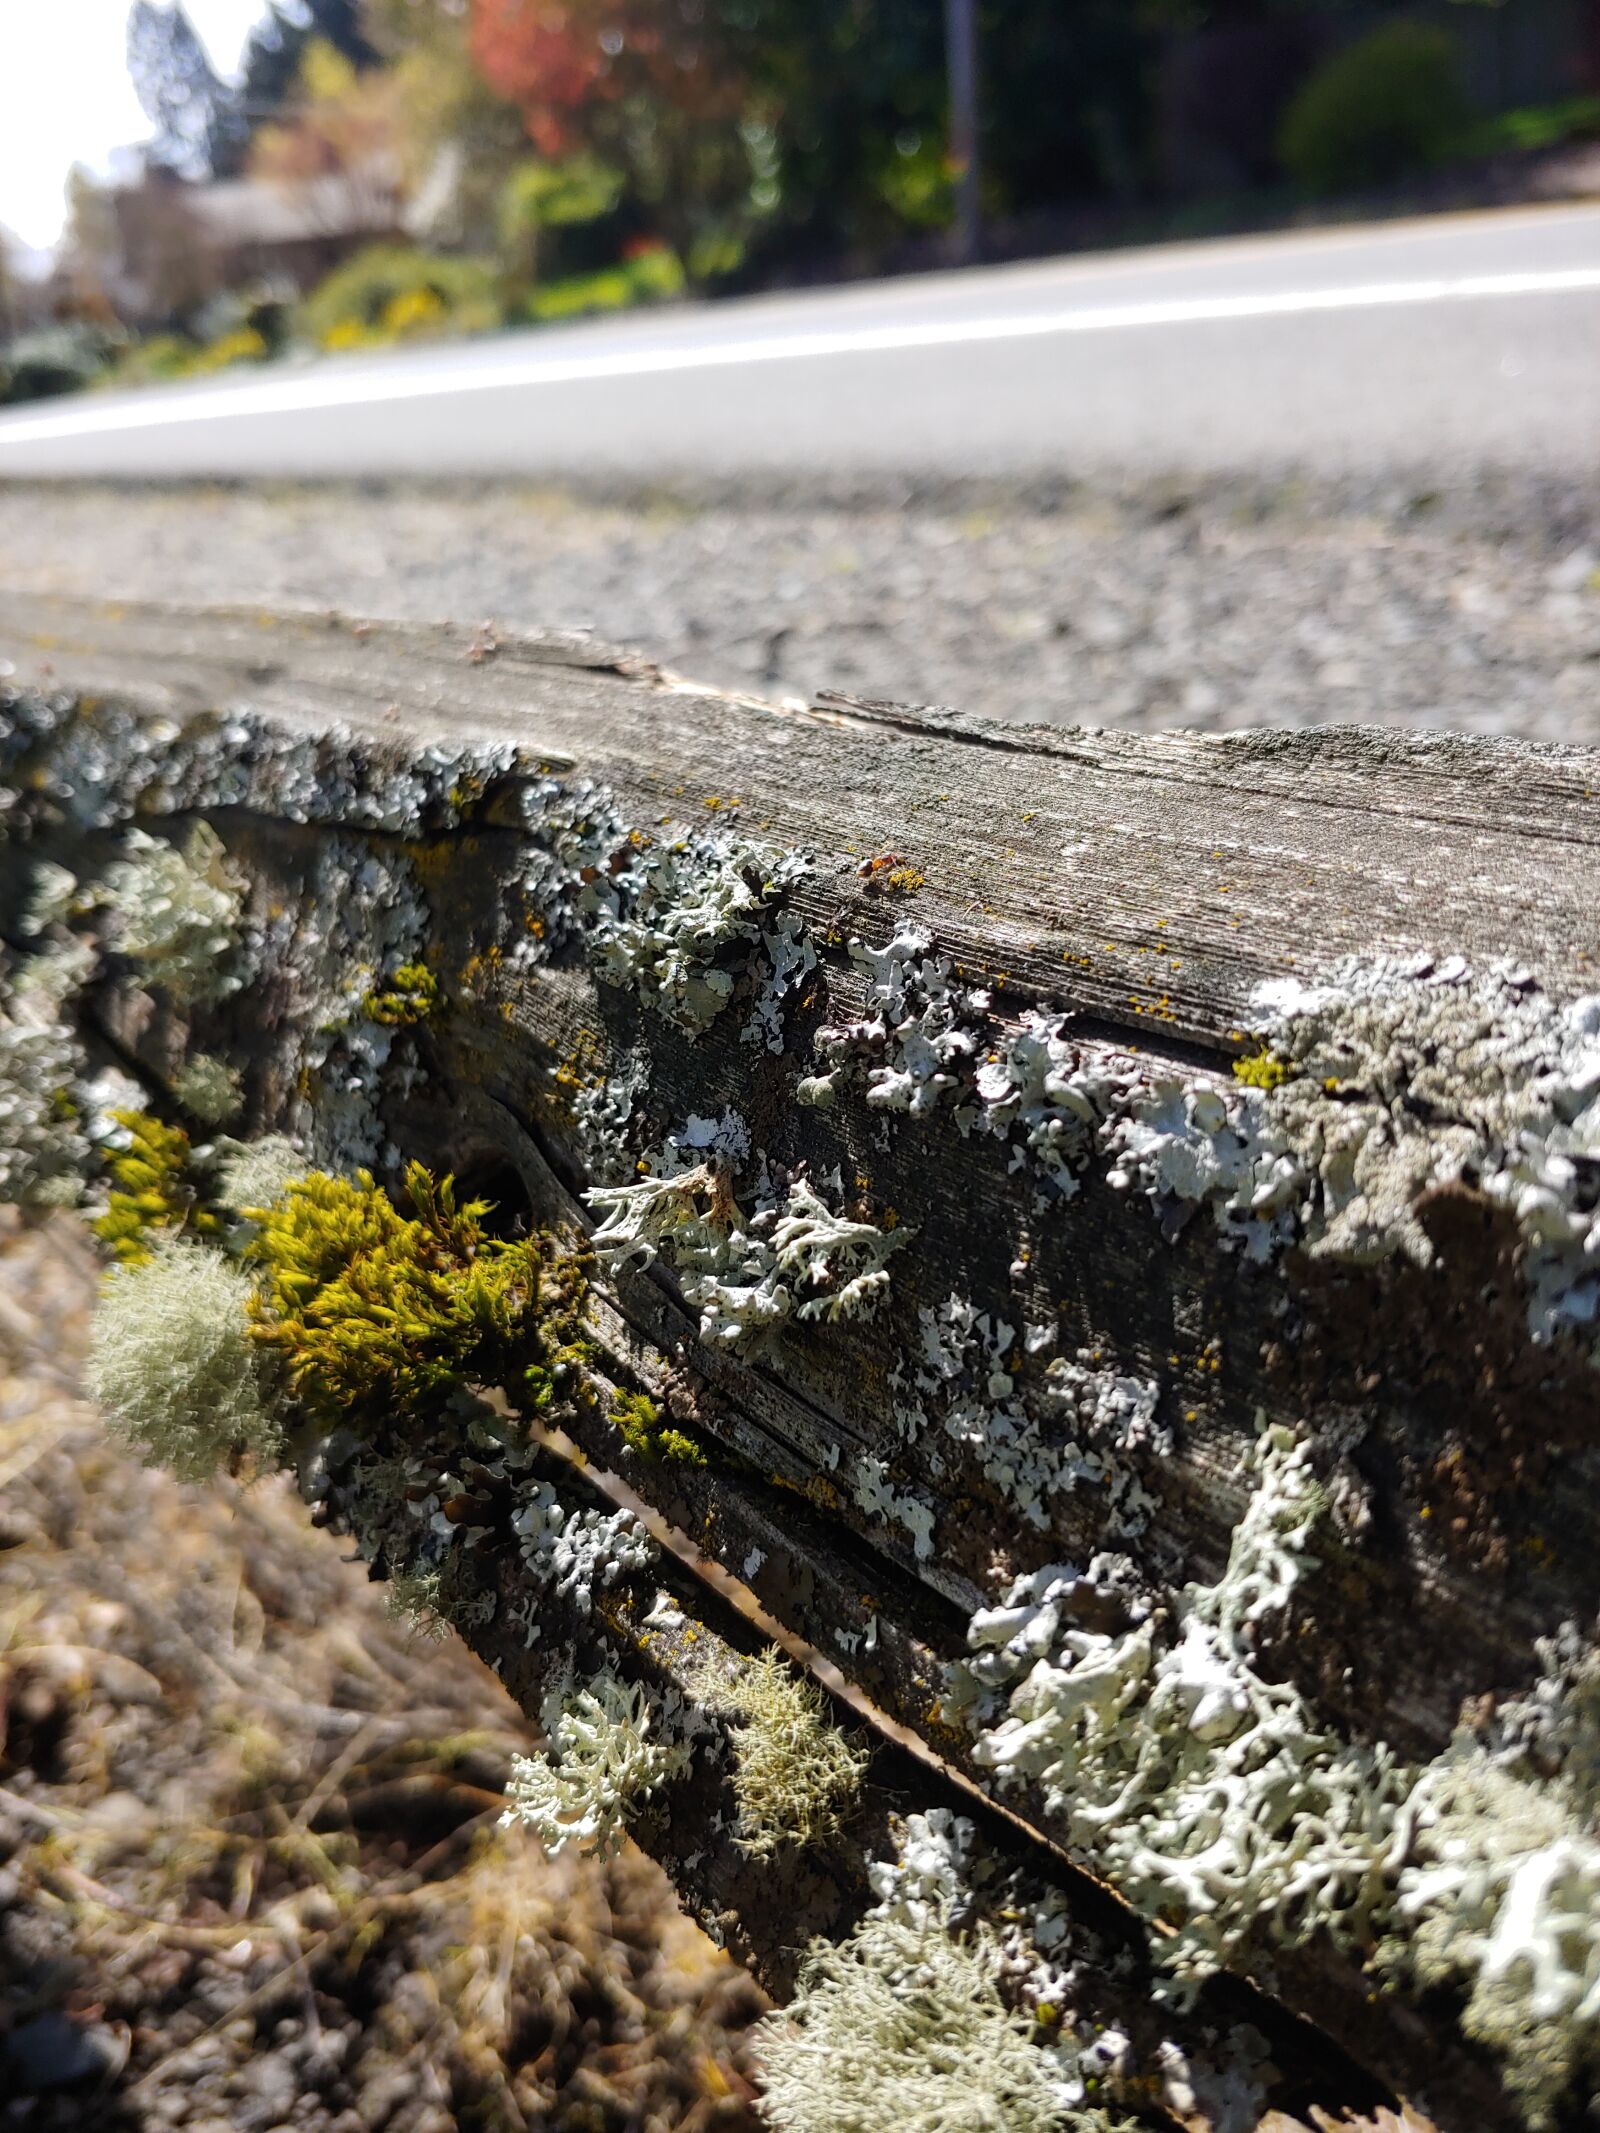 LG G7 THINQ sample photo. Moss, wood, fence photography